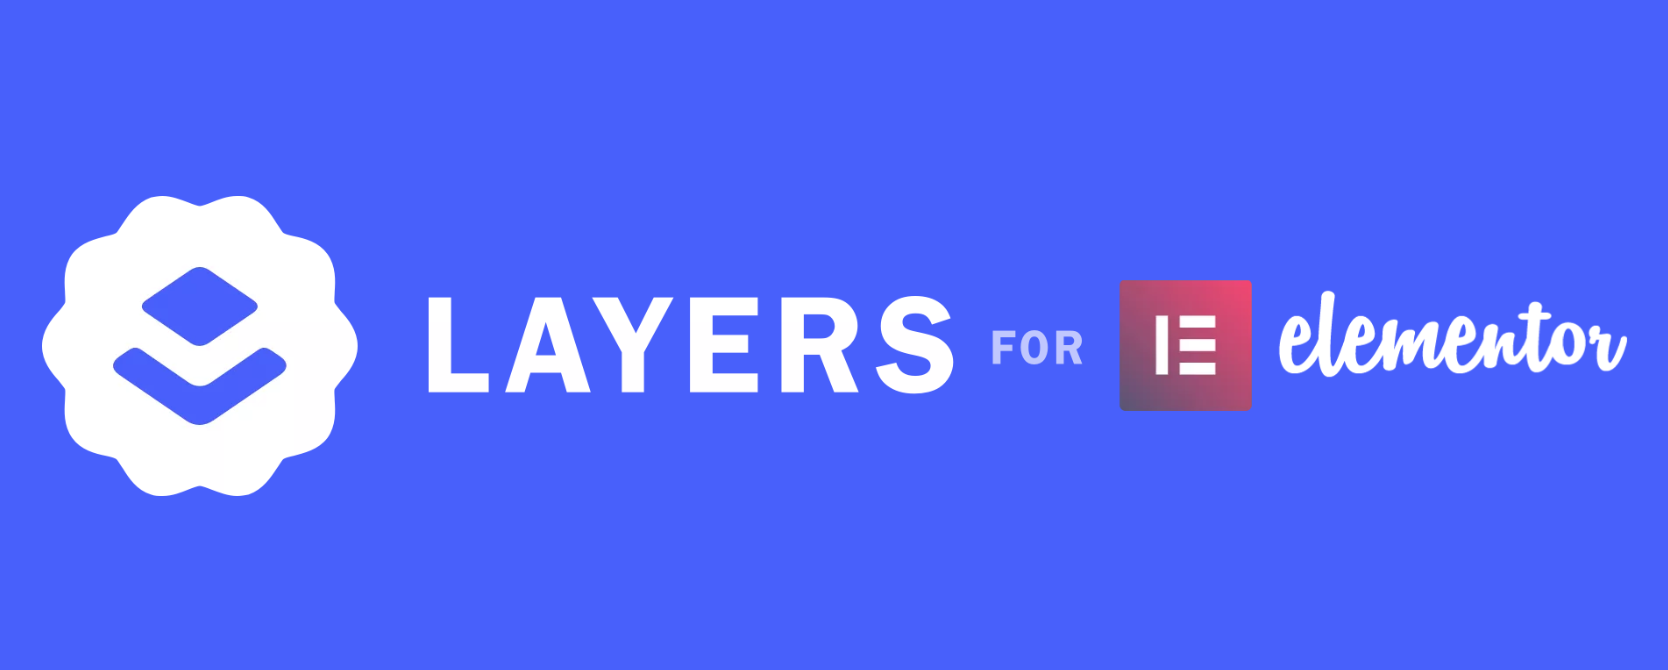 Elementor Acquires Layers WP to Expand Compatible Theme Options for Users